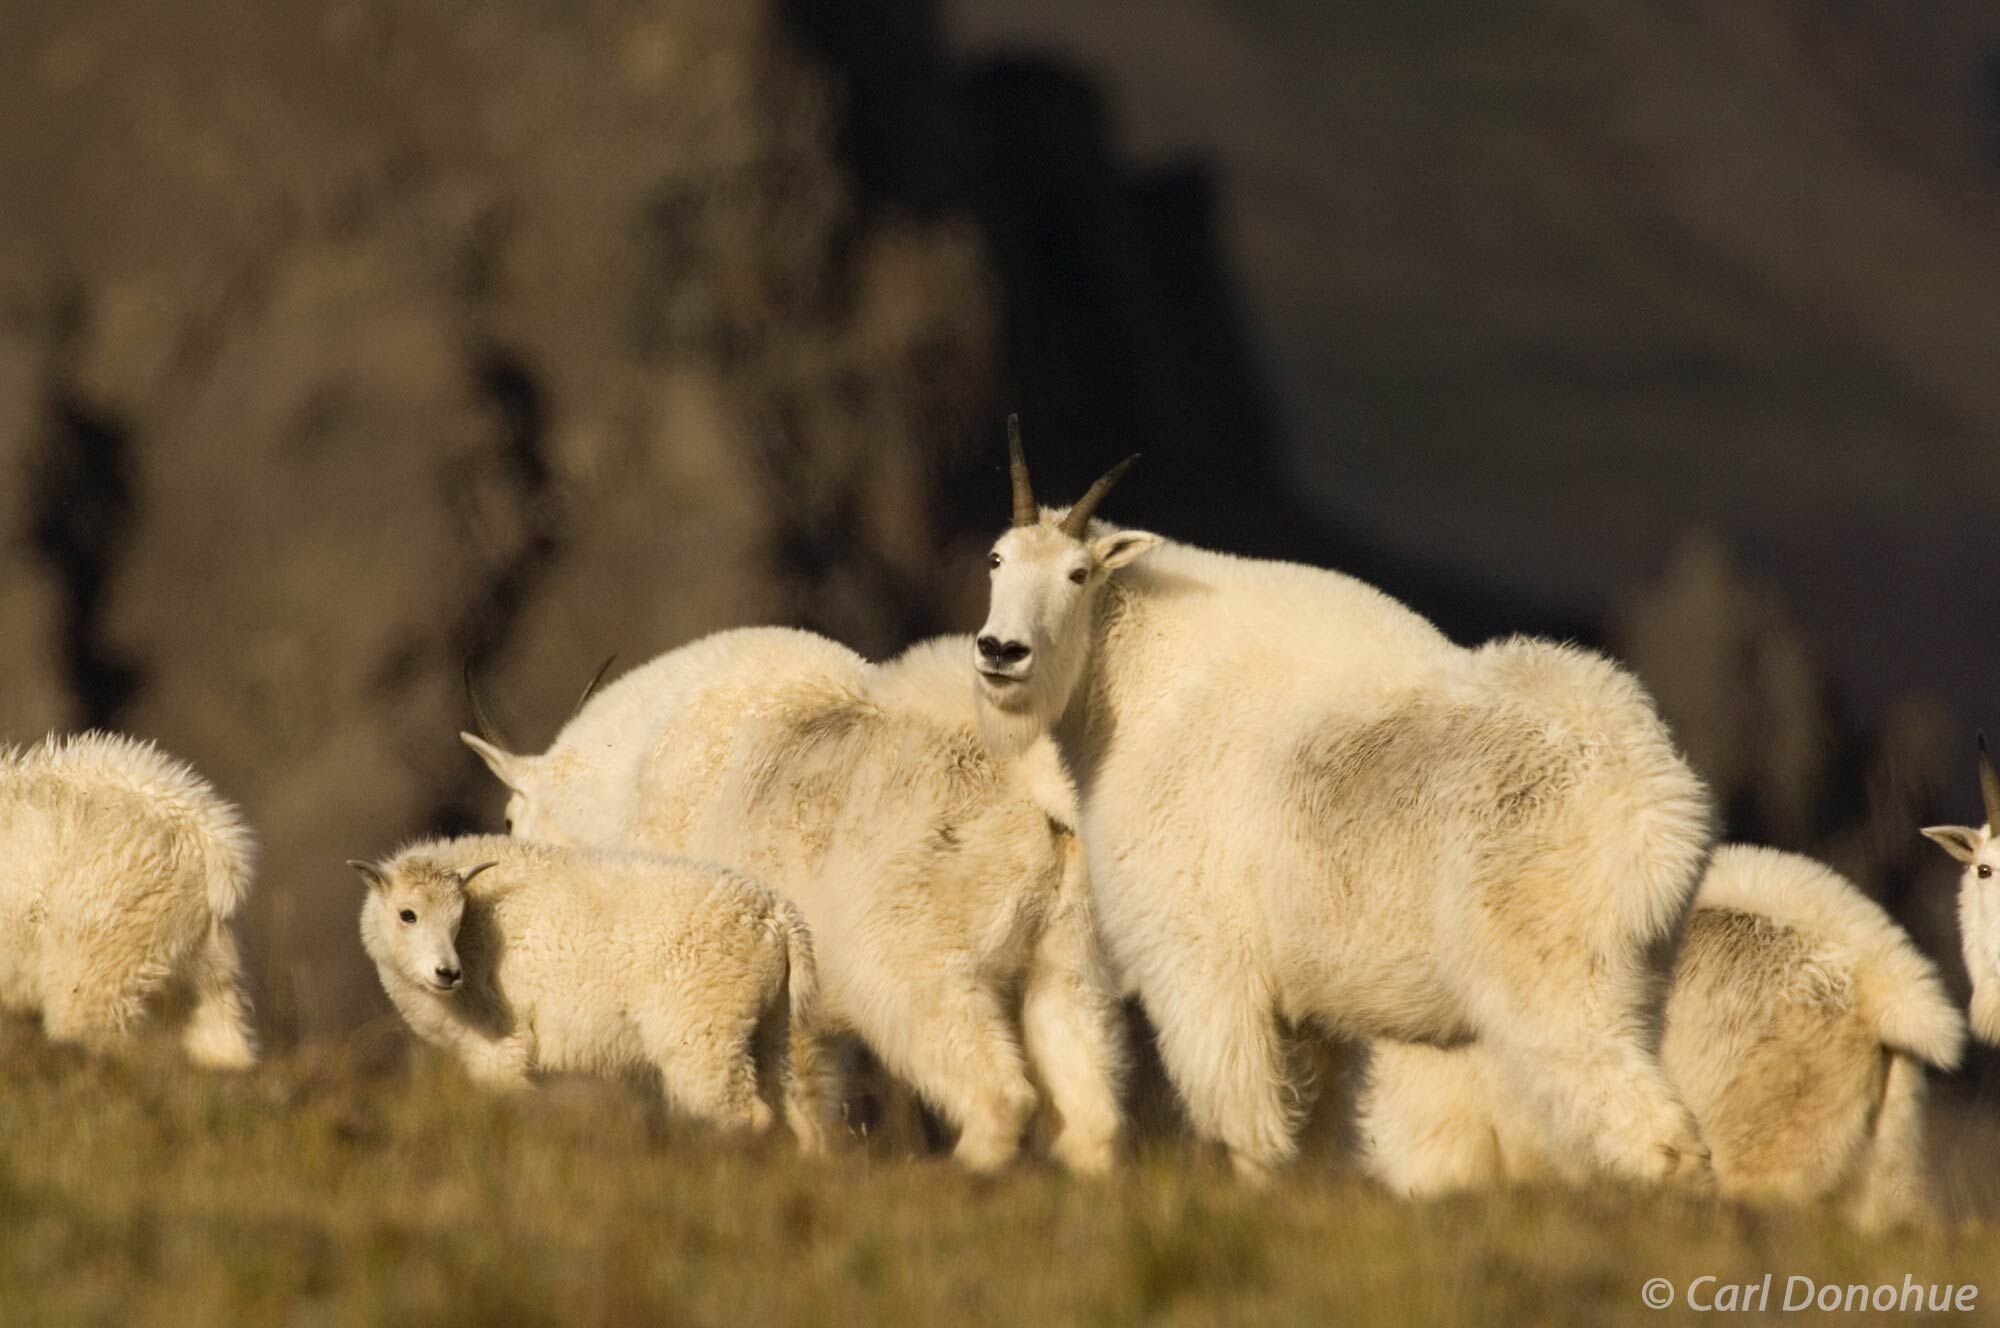 Mountain goat family on the tundra in Alaska’s Wrangell-St. Elias National Park. Mountain goats are often found in small bands...